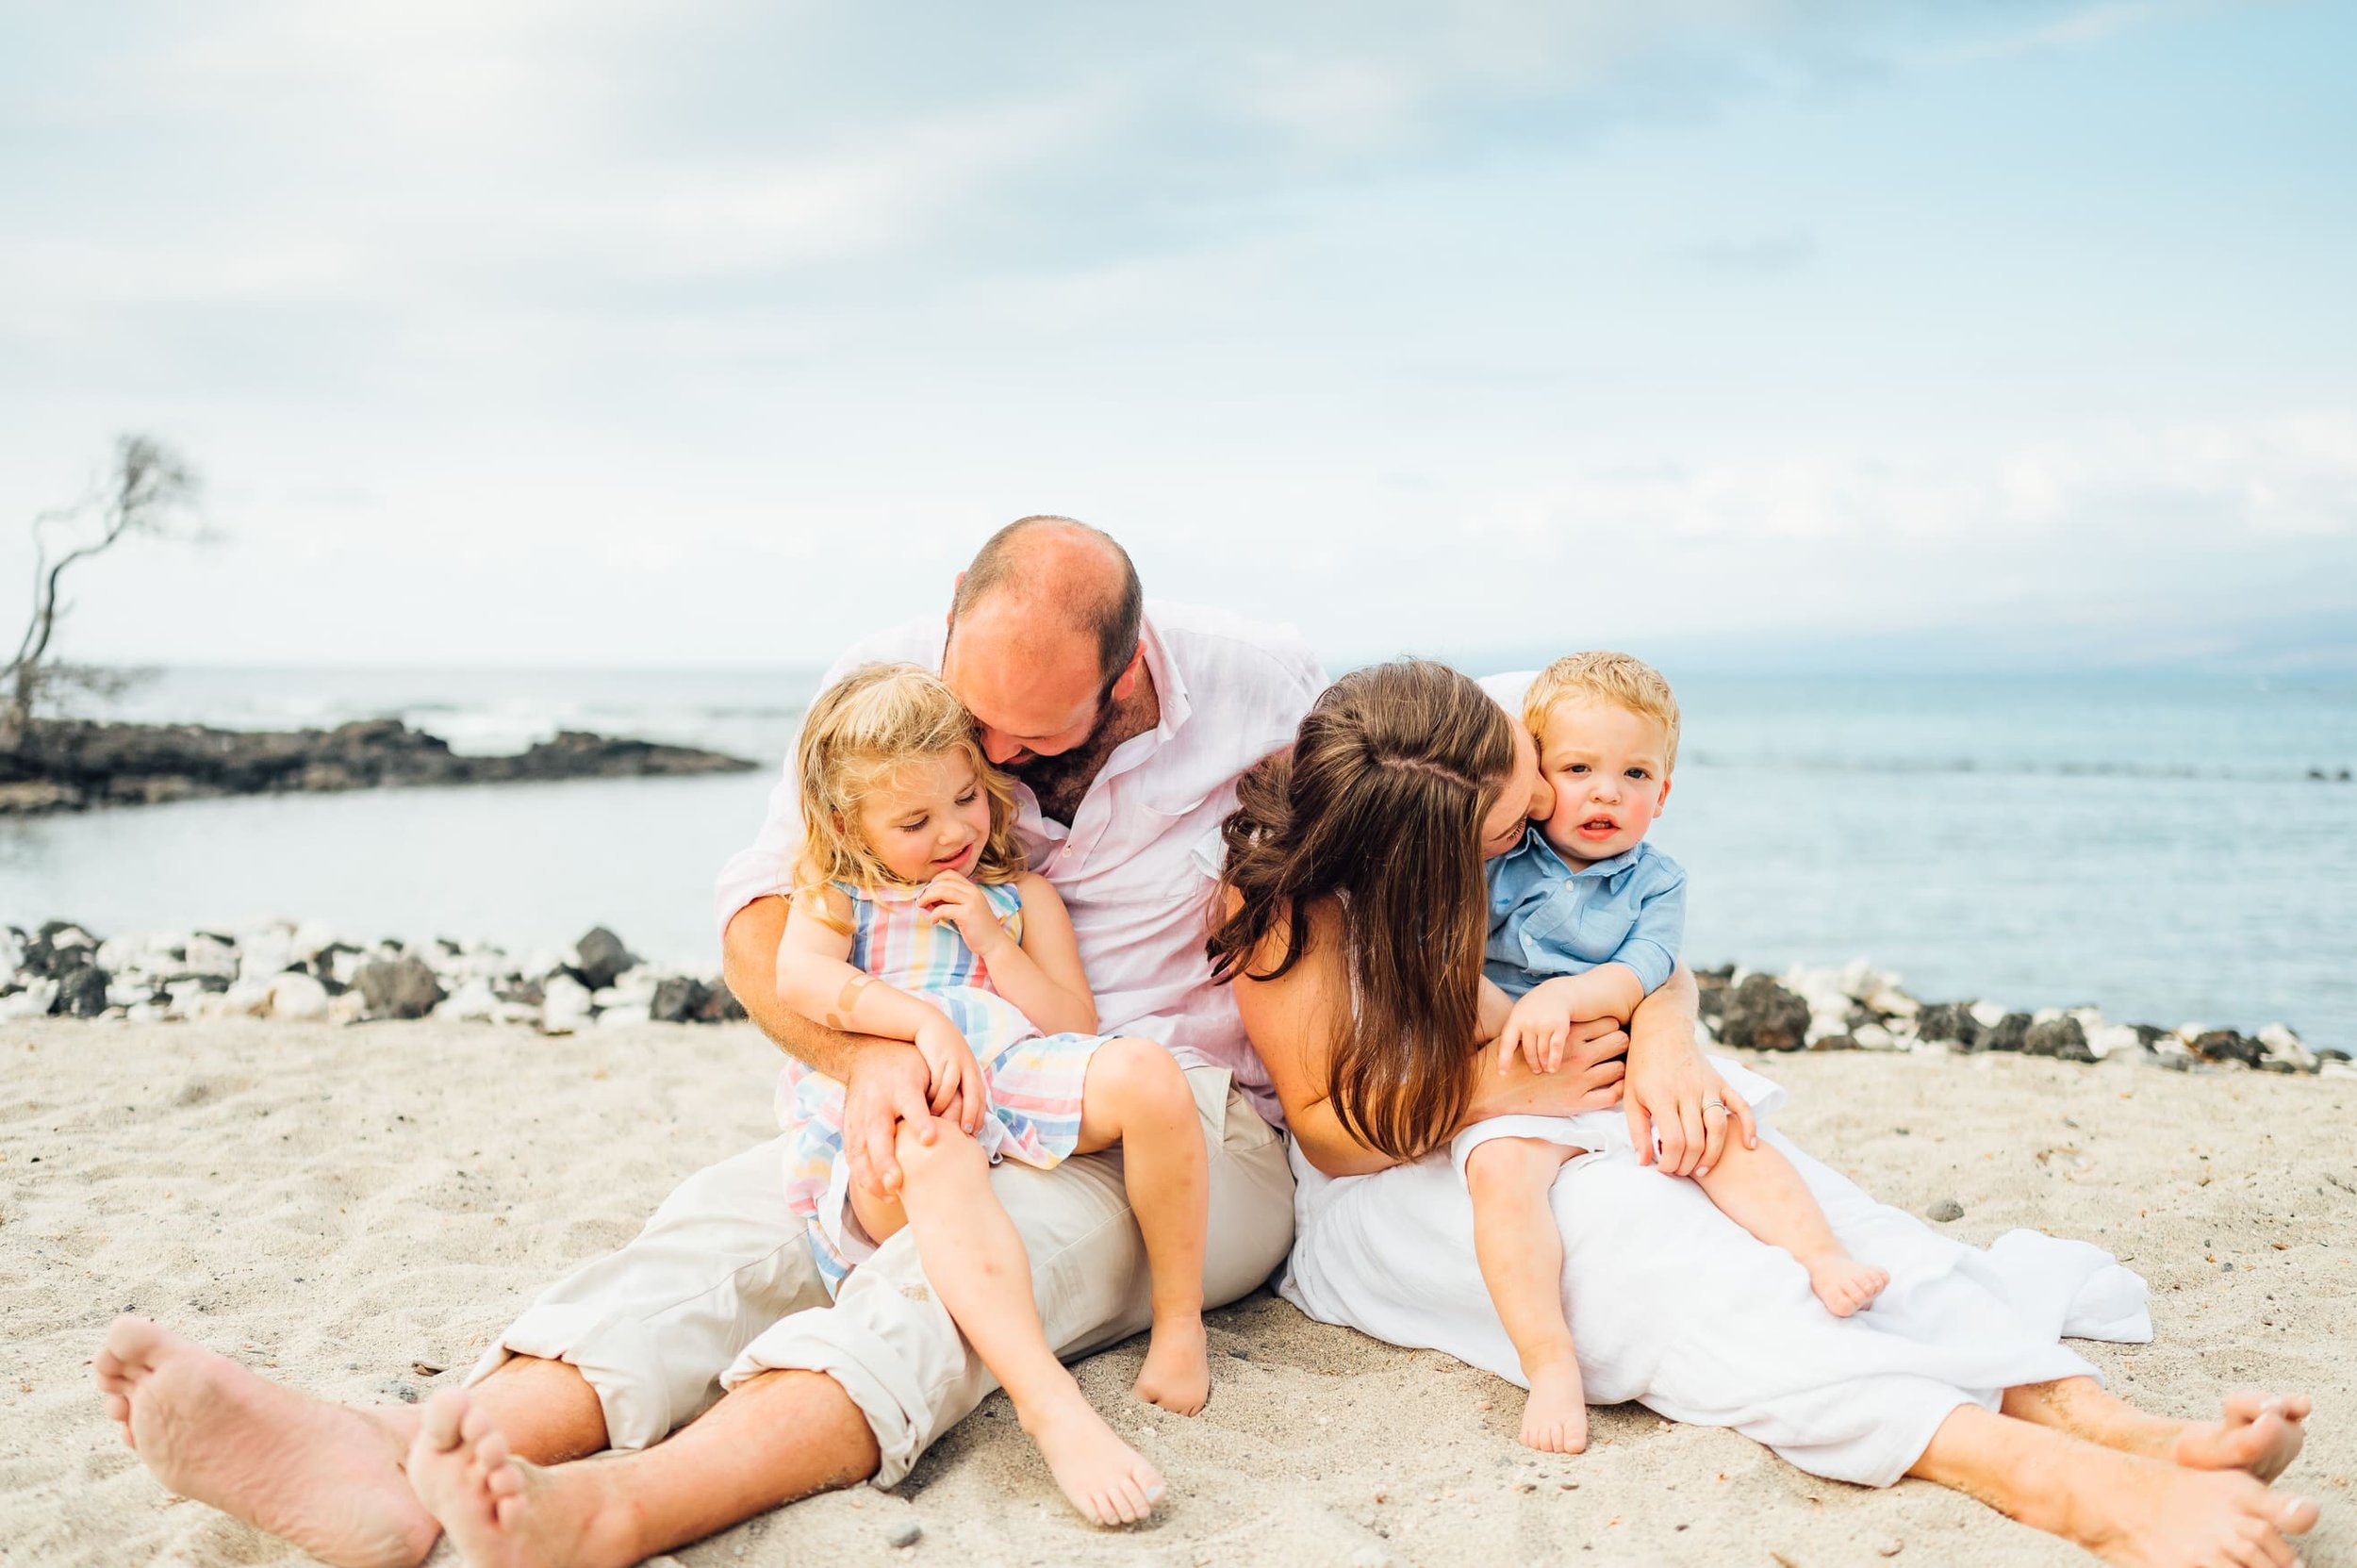 beach-photo-session-outfits-family-14.jpg